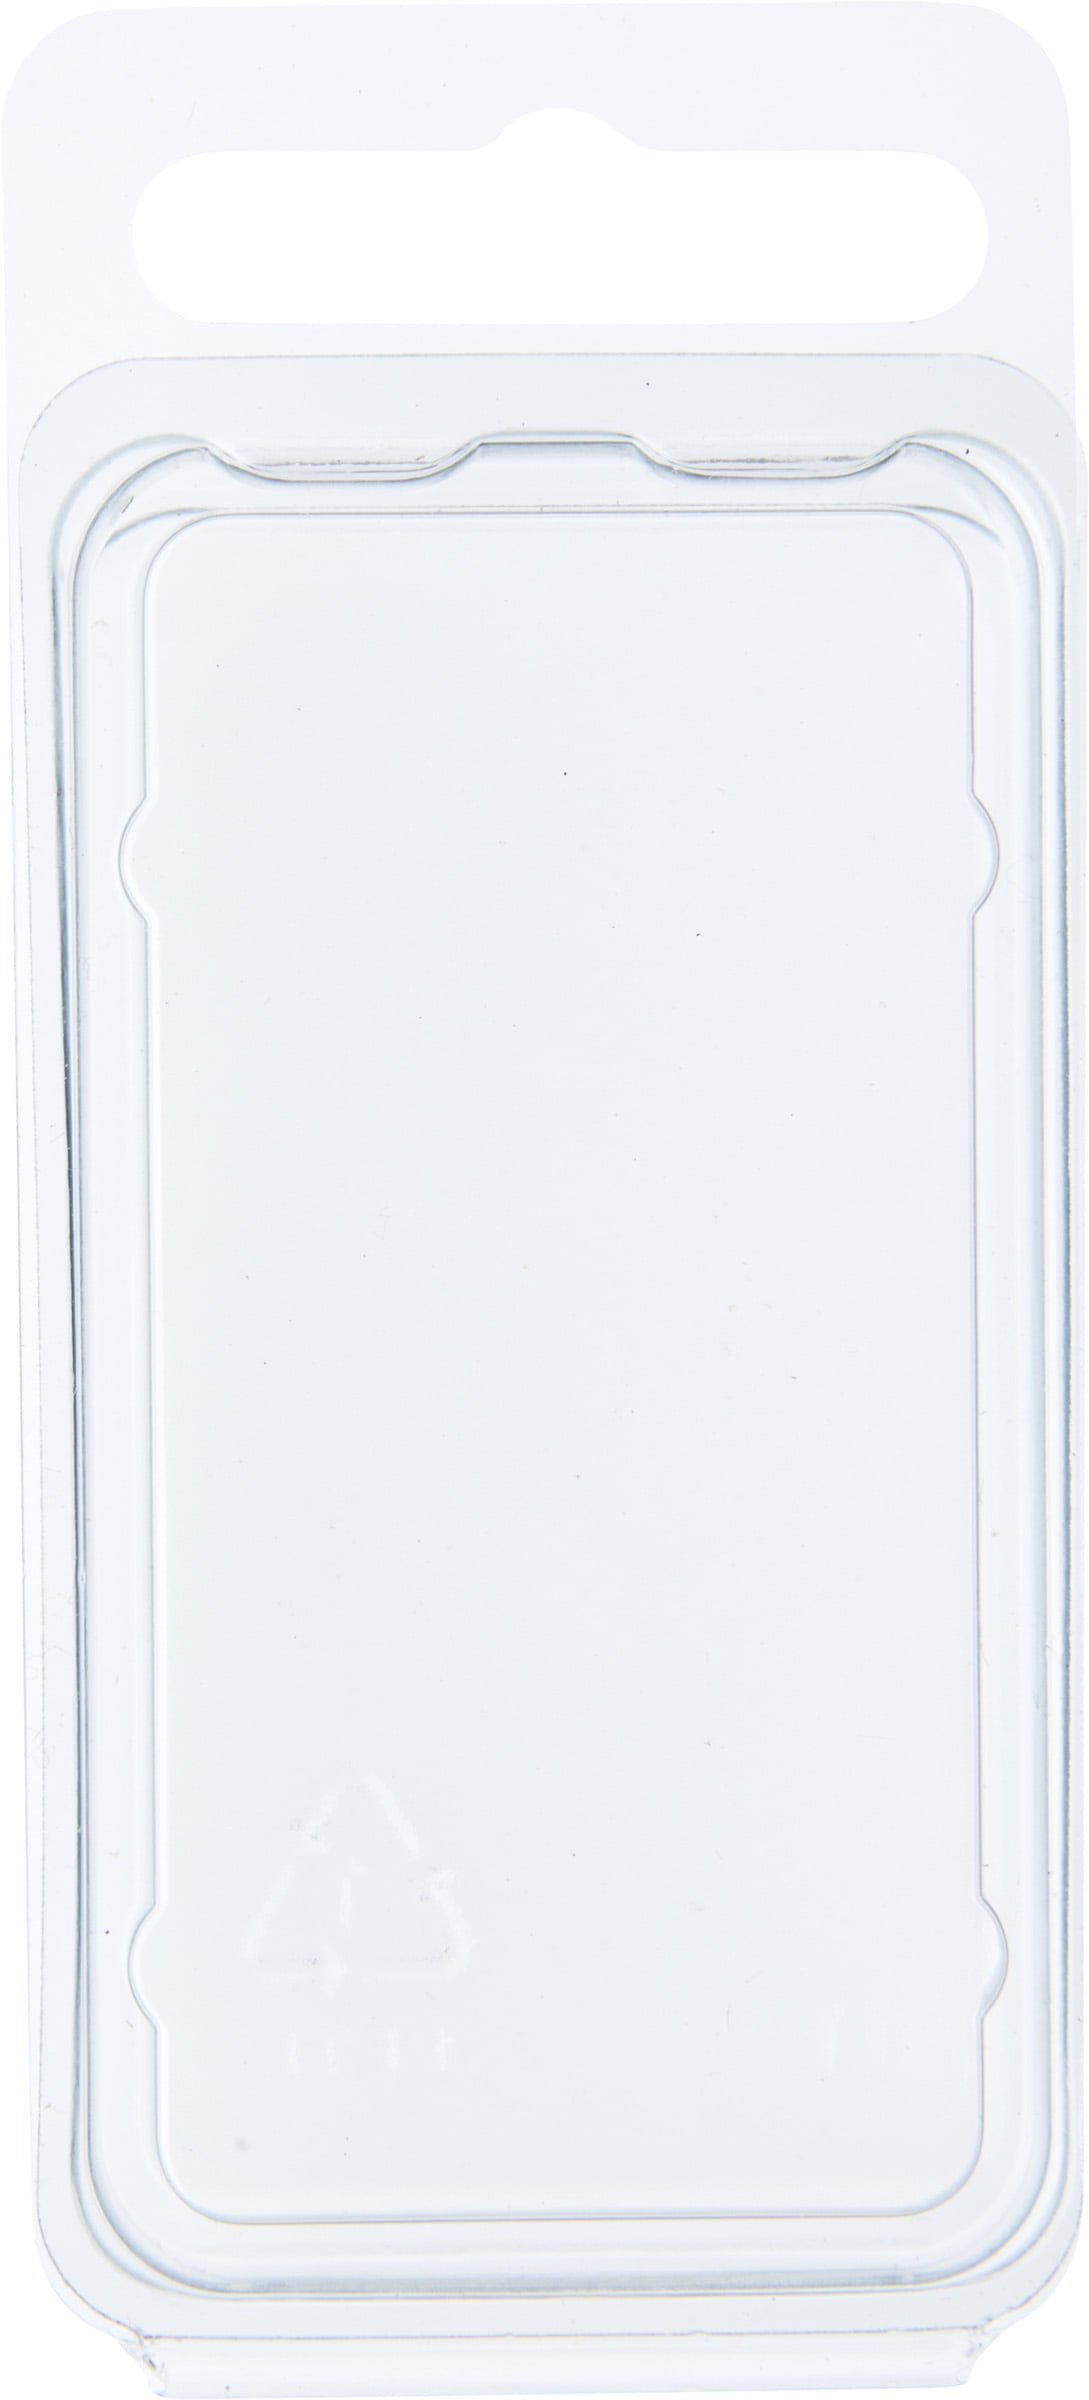 Collecting Warehouse Clear Plastic Clamshell Package/Storage Container 2.375 H x 1.25 W x 0.5 D Pack of 100